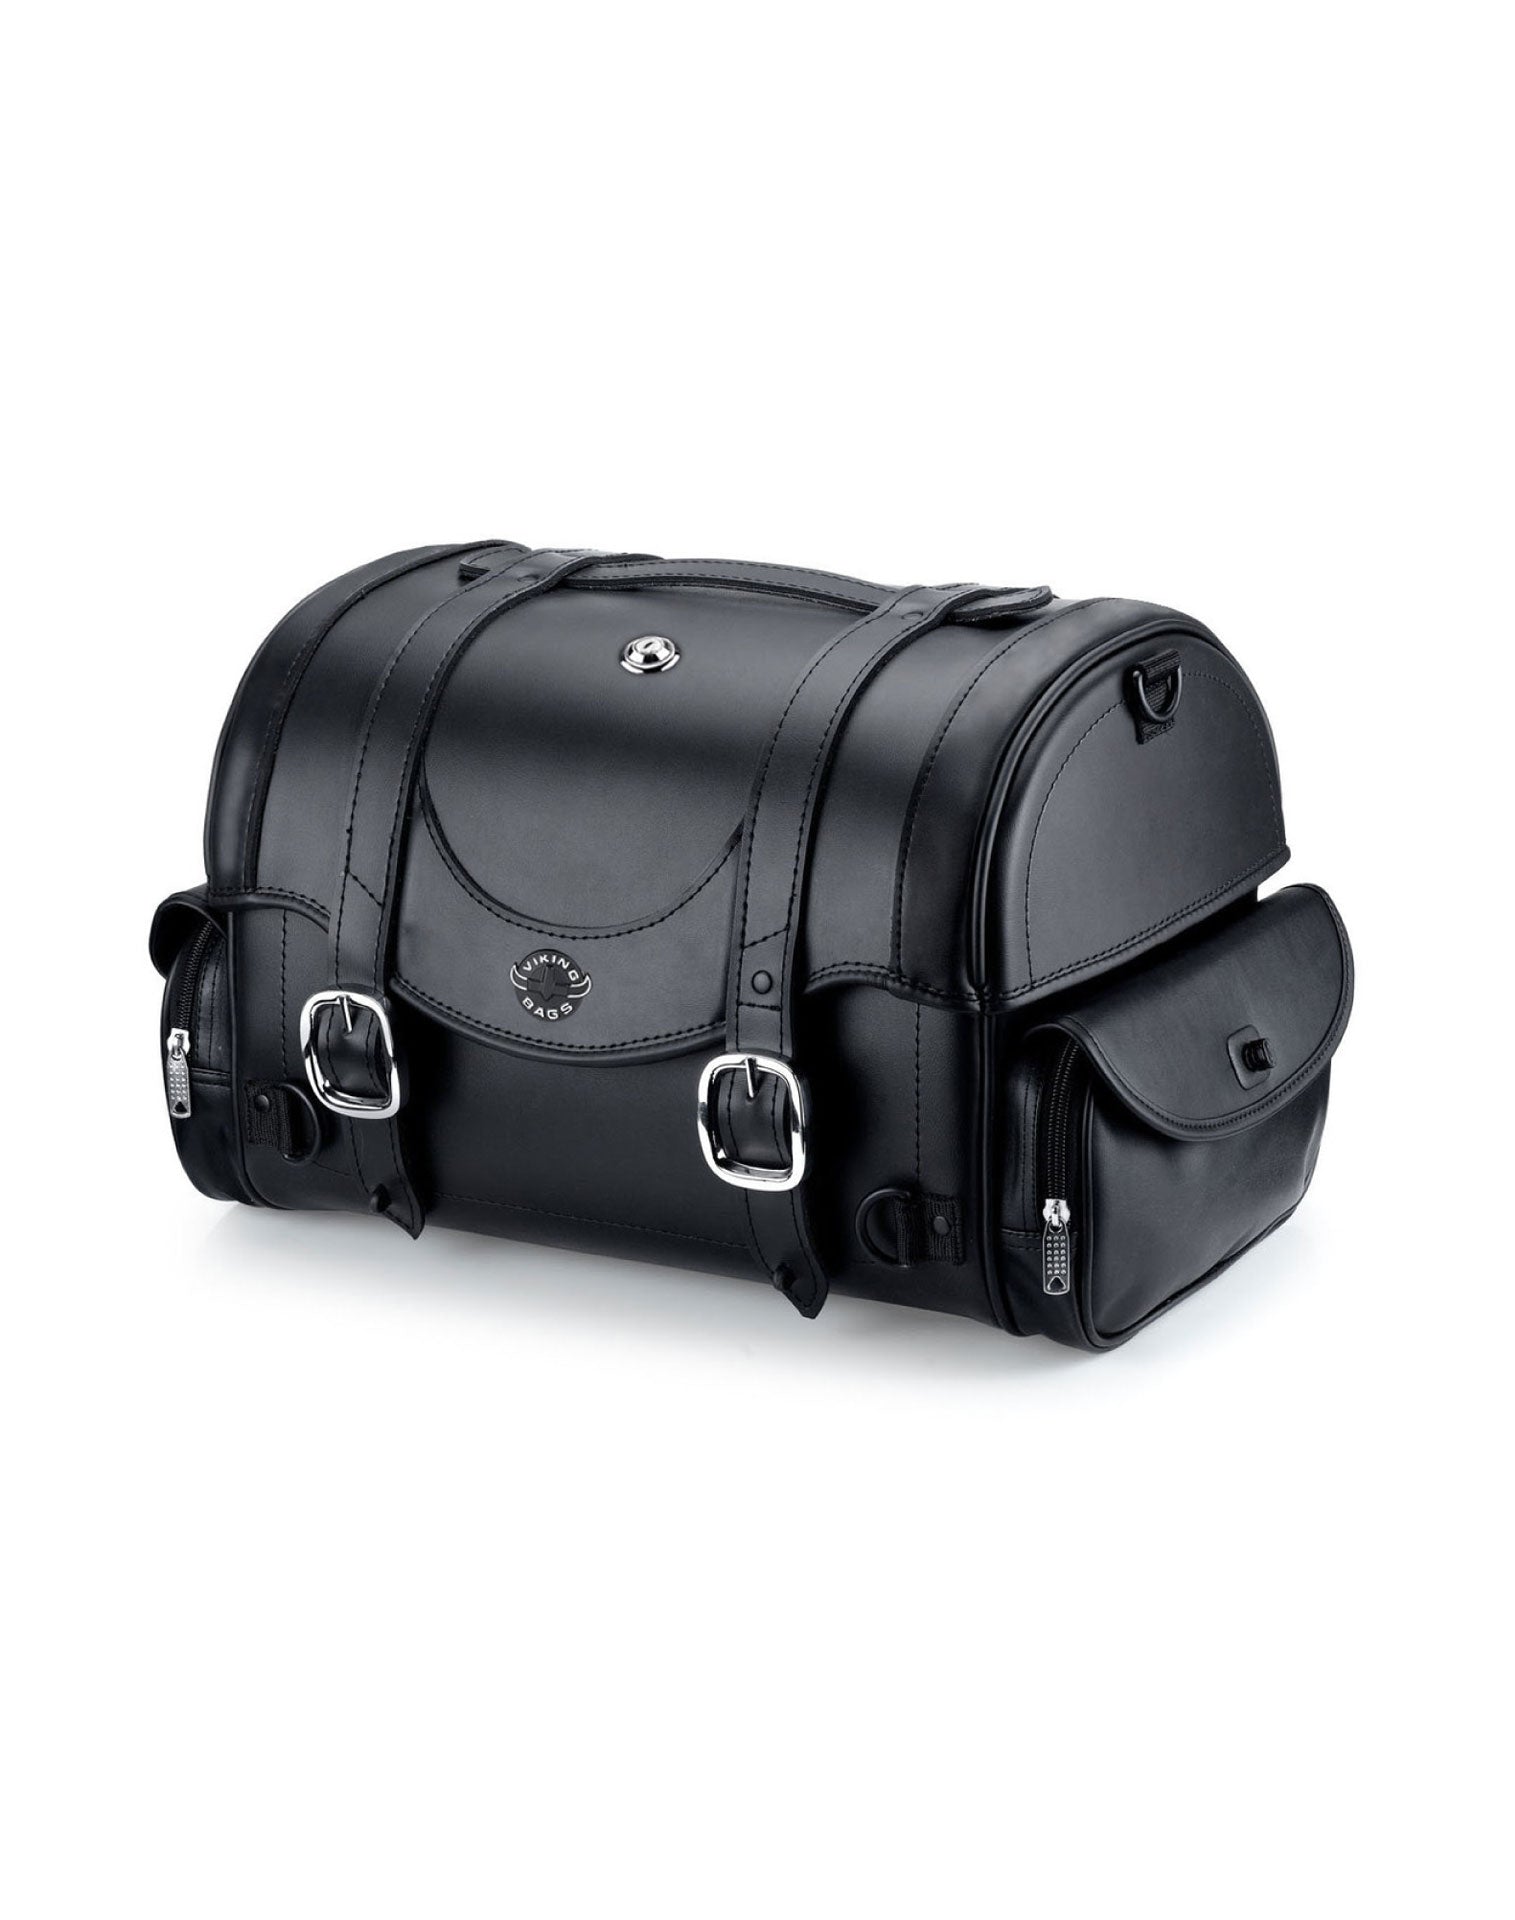 21L - Century Medium Leather Motorcycle Roll Bag for Harley Davidson